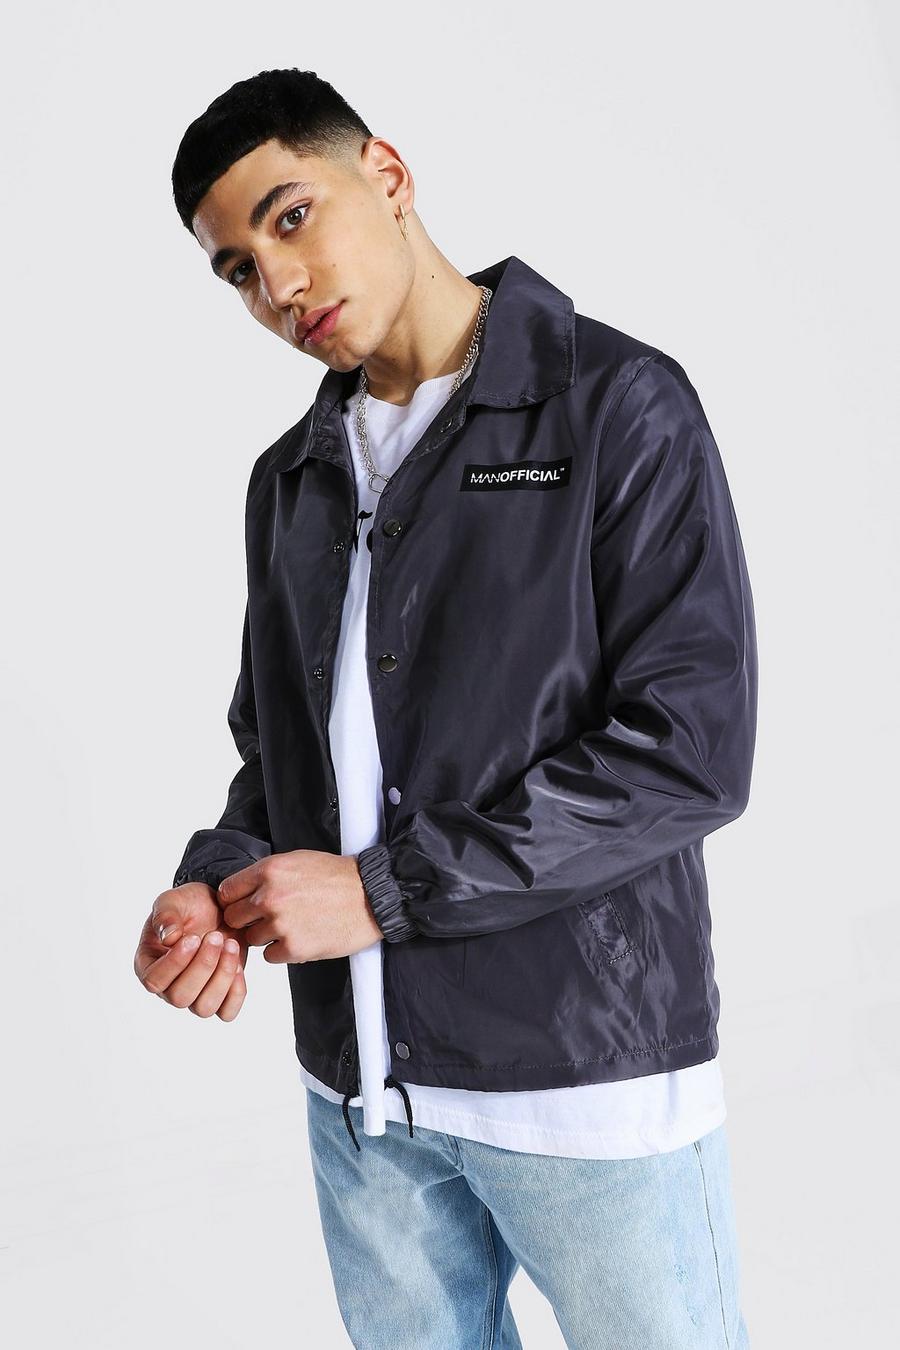 Charcoal MAN Official Branded Nylon Coach Jacket image number 1